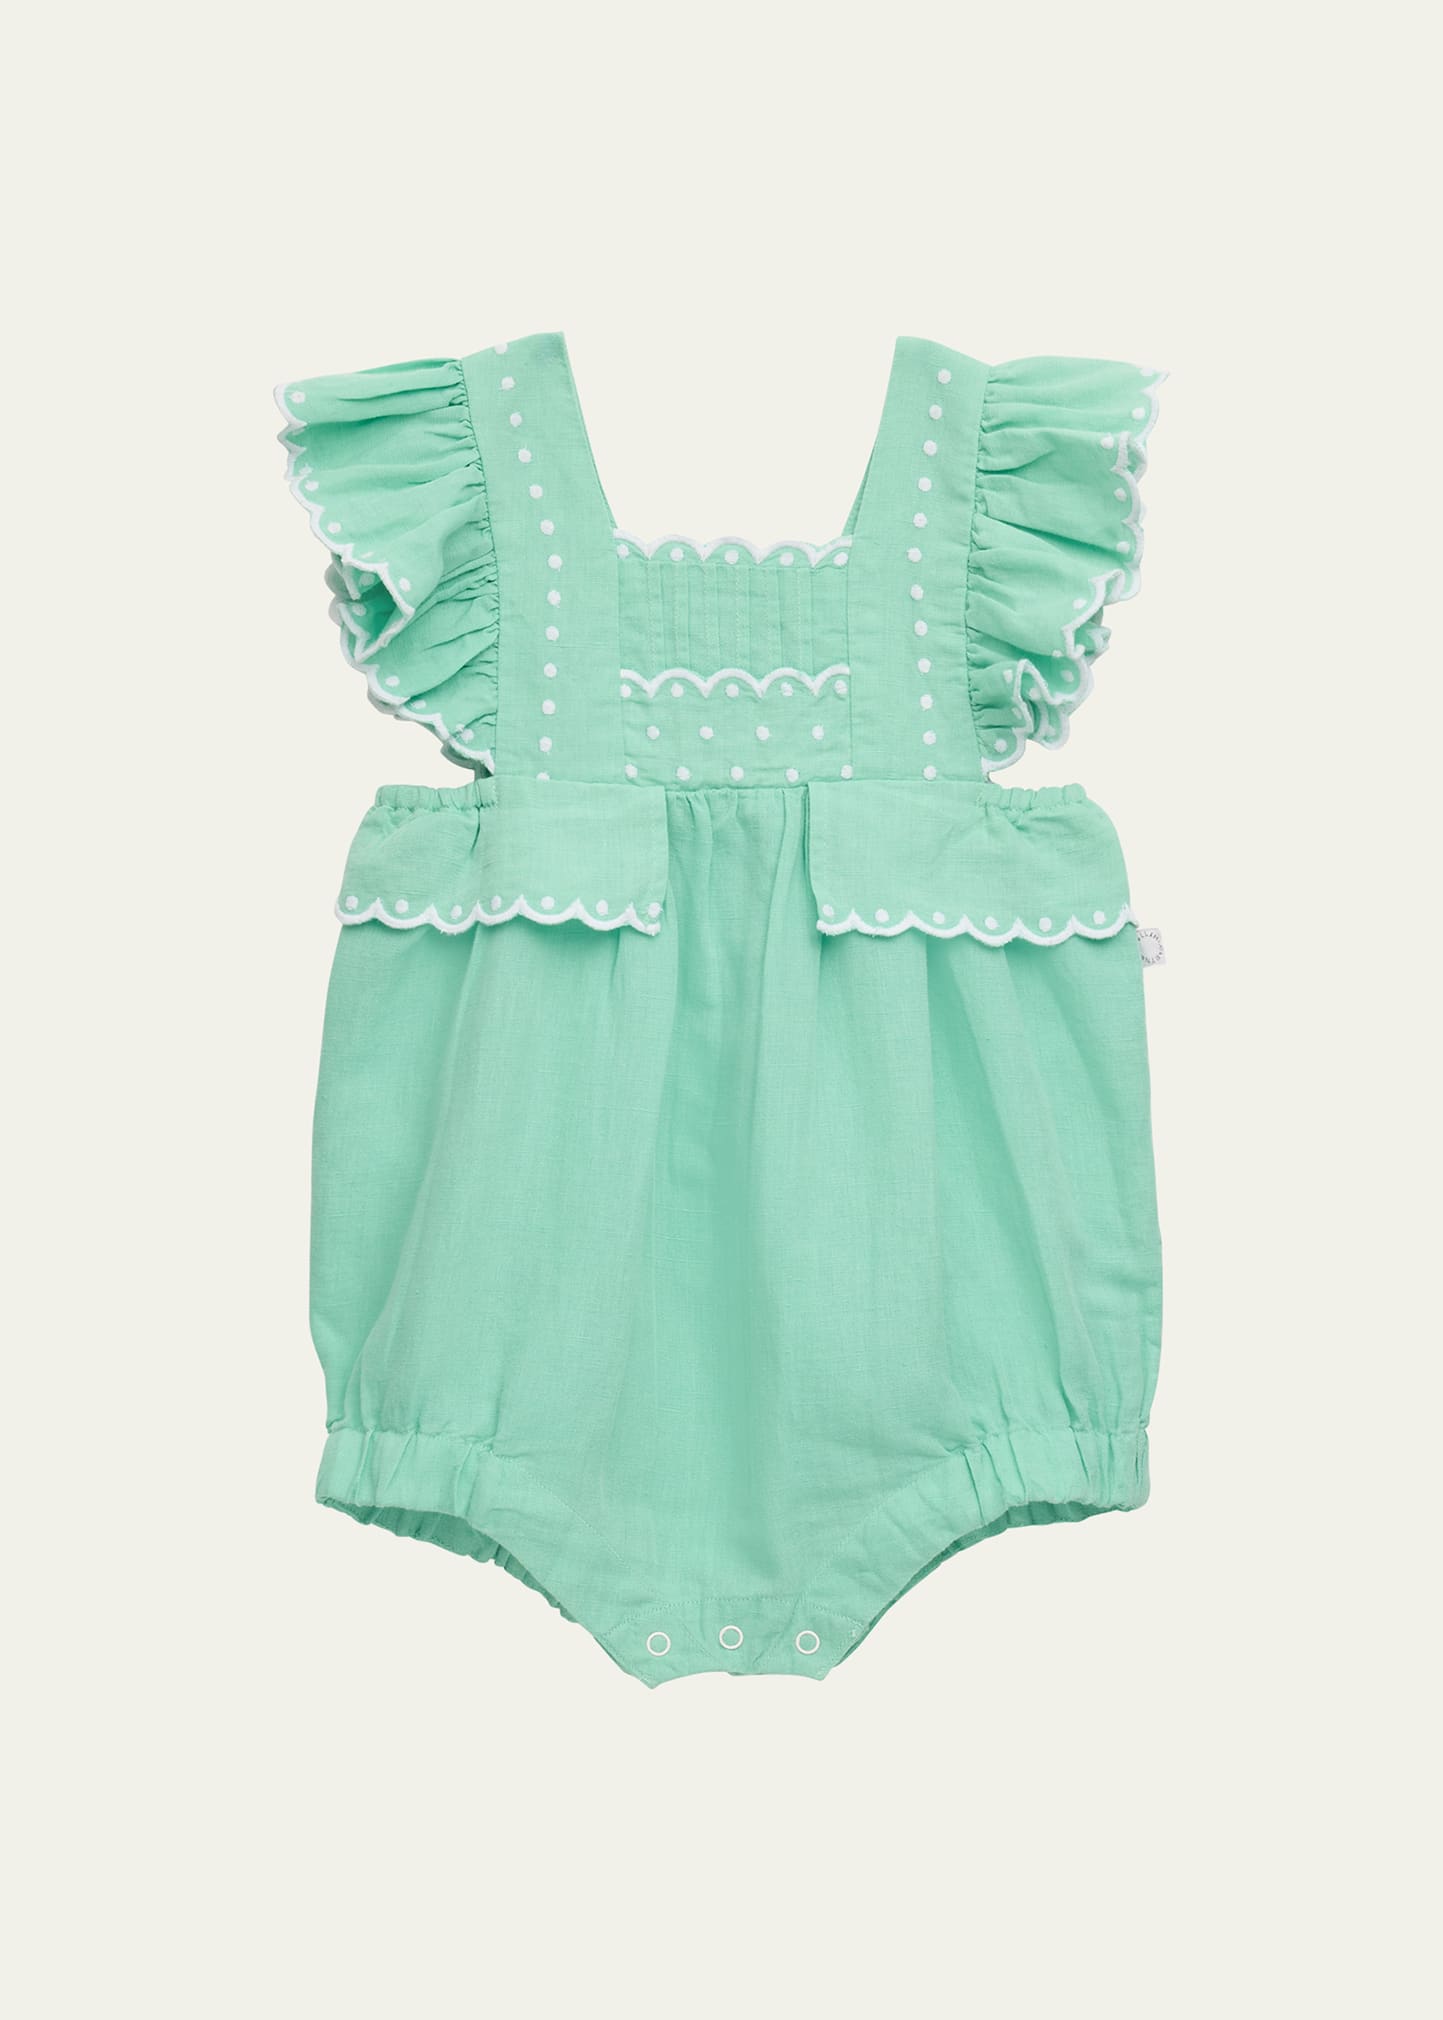 Girl's Embroidered Linen Romper, Size 3M-36M